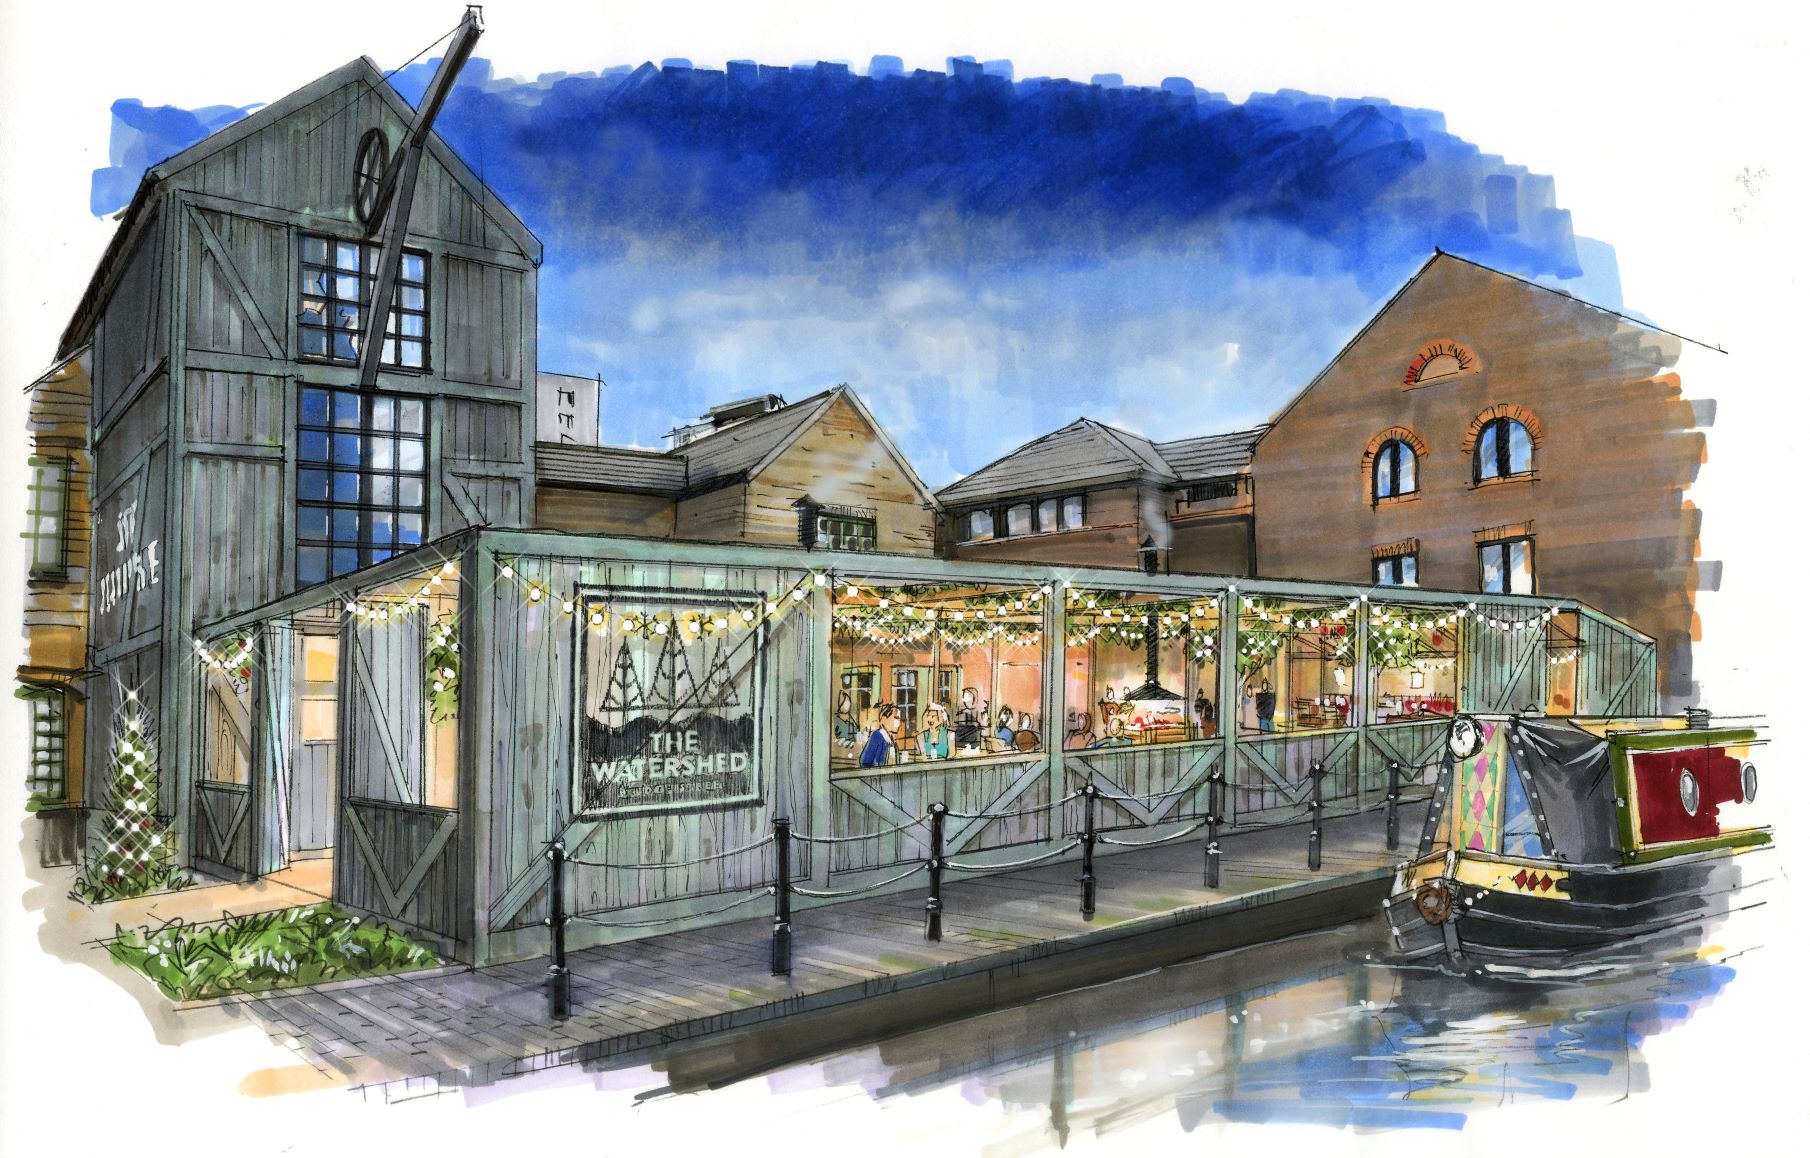 A sketch drawing of The Watershed venue, a pergola on the canal